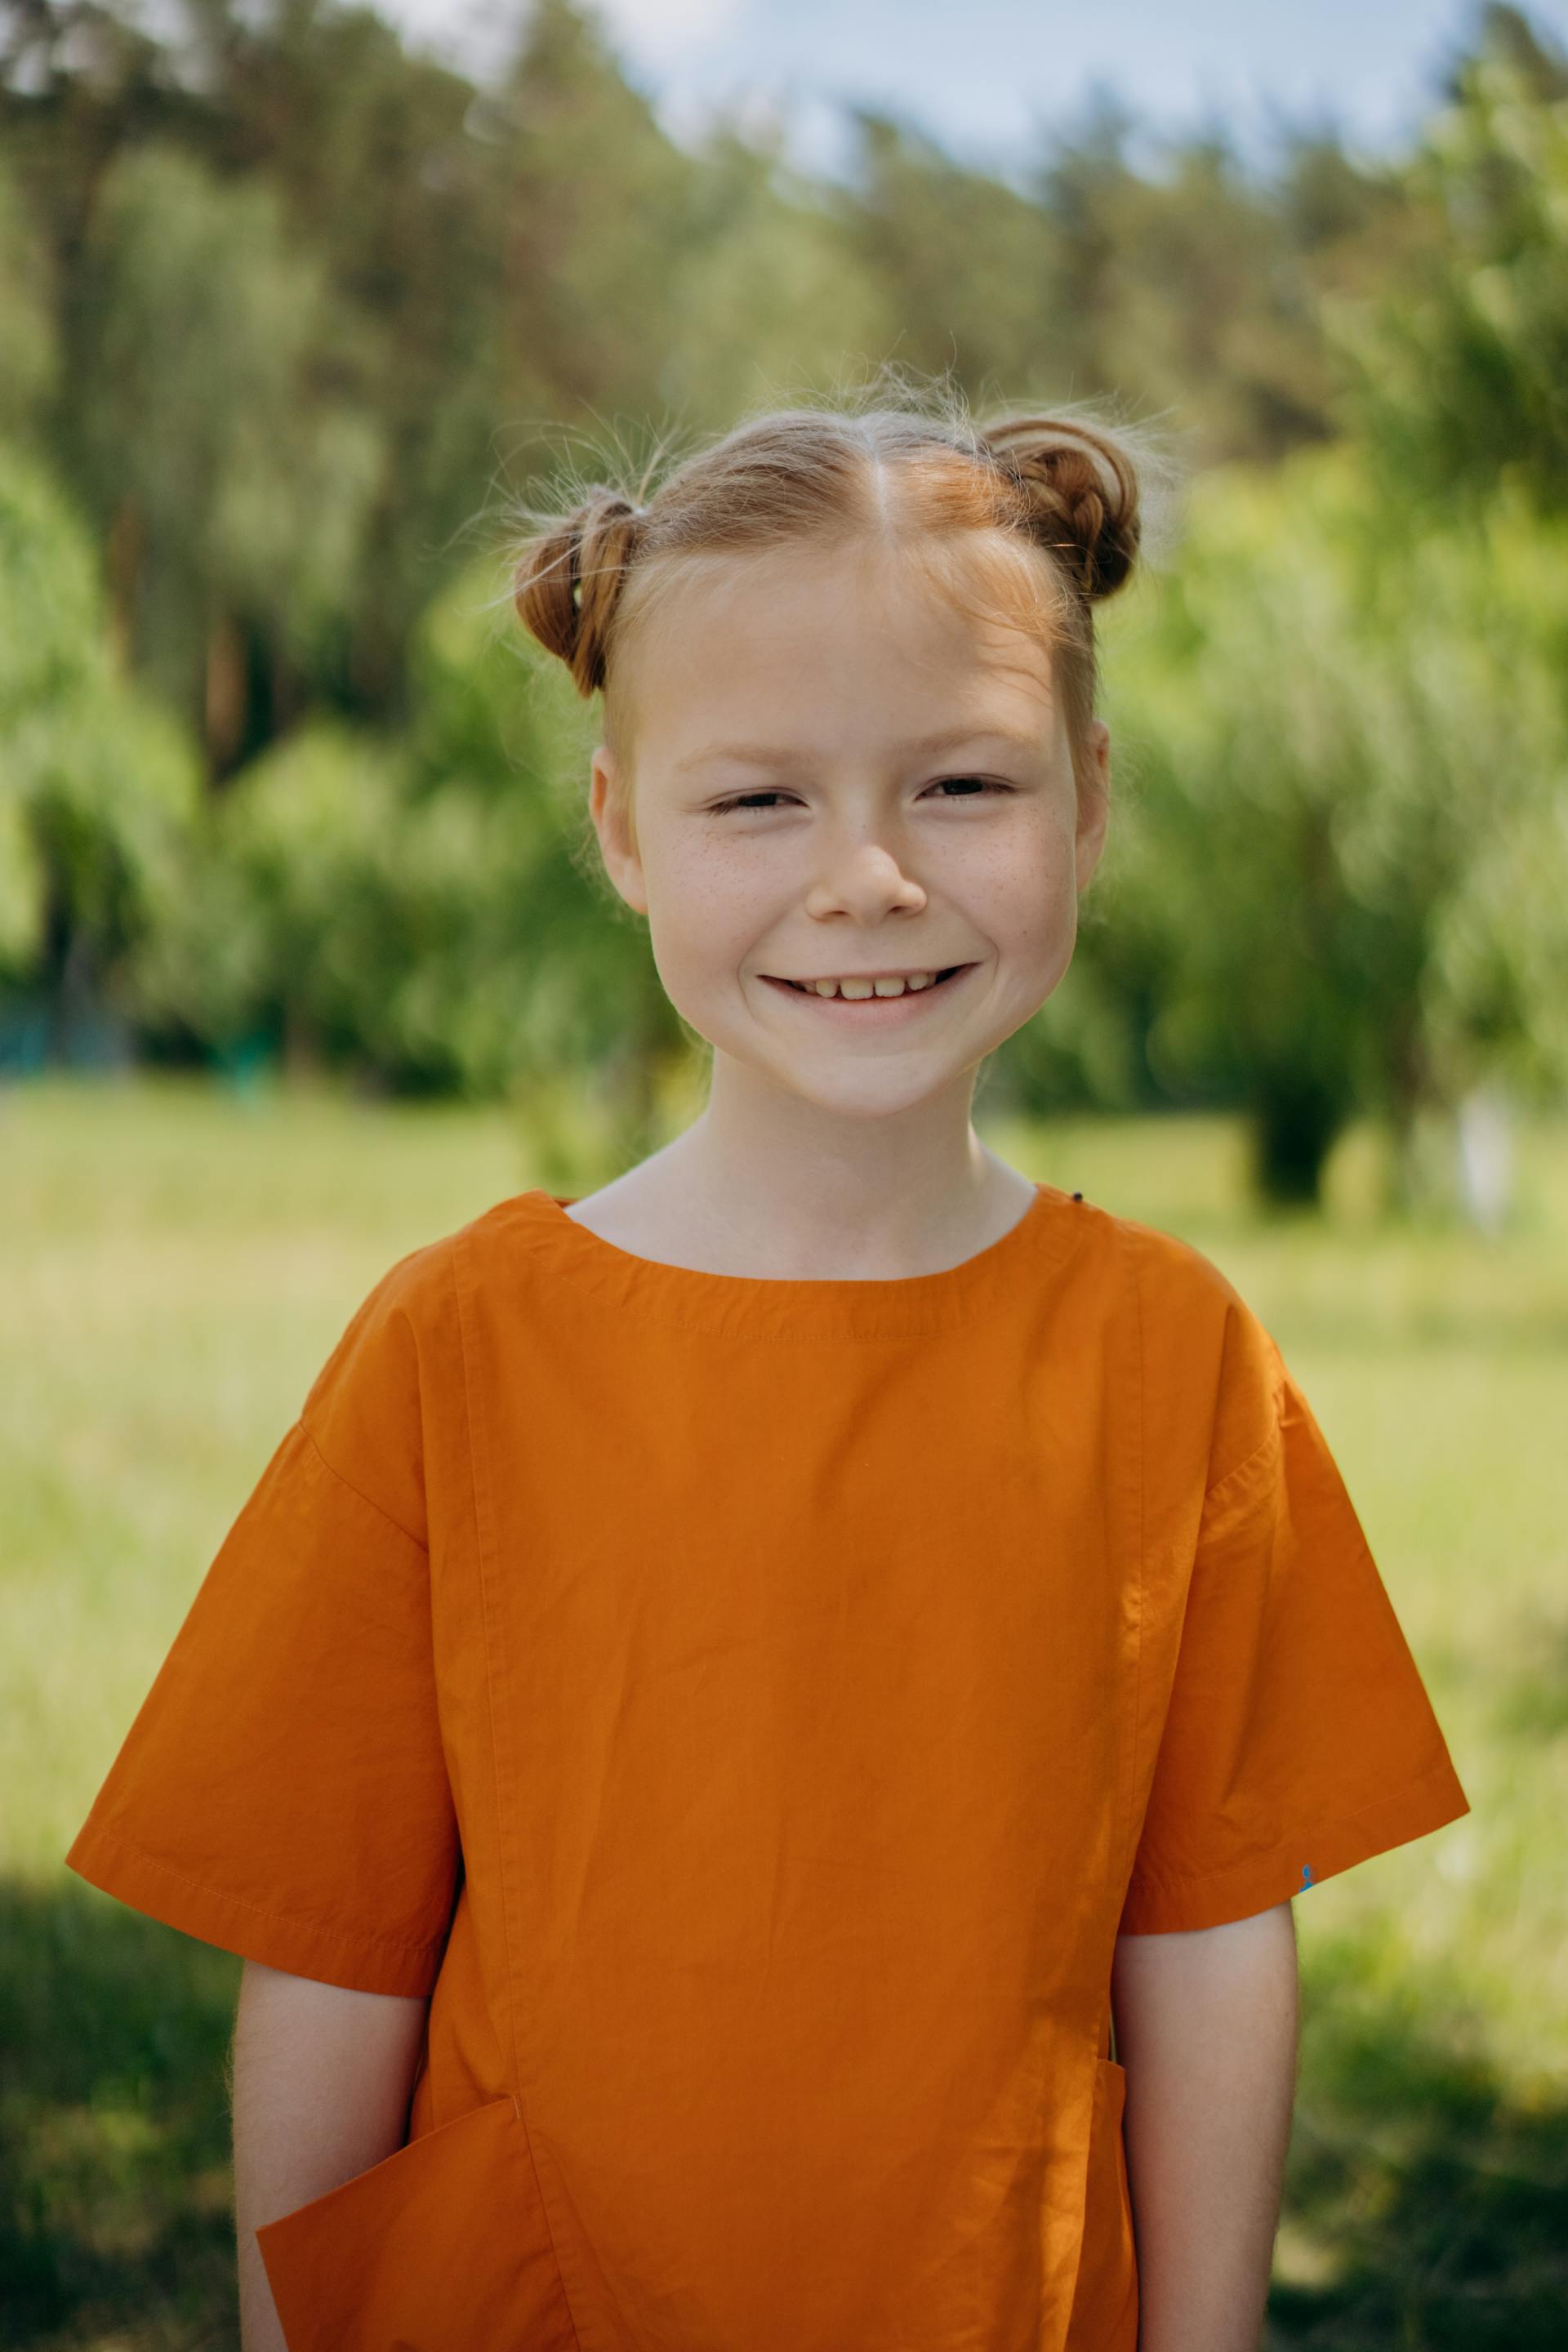 A little girl smiling | Source: Pexels